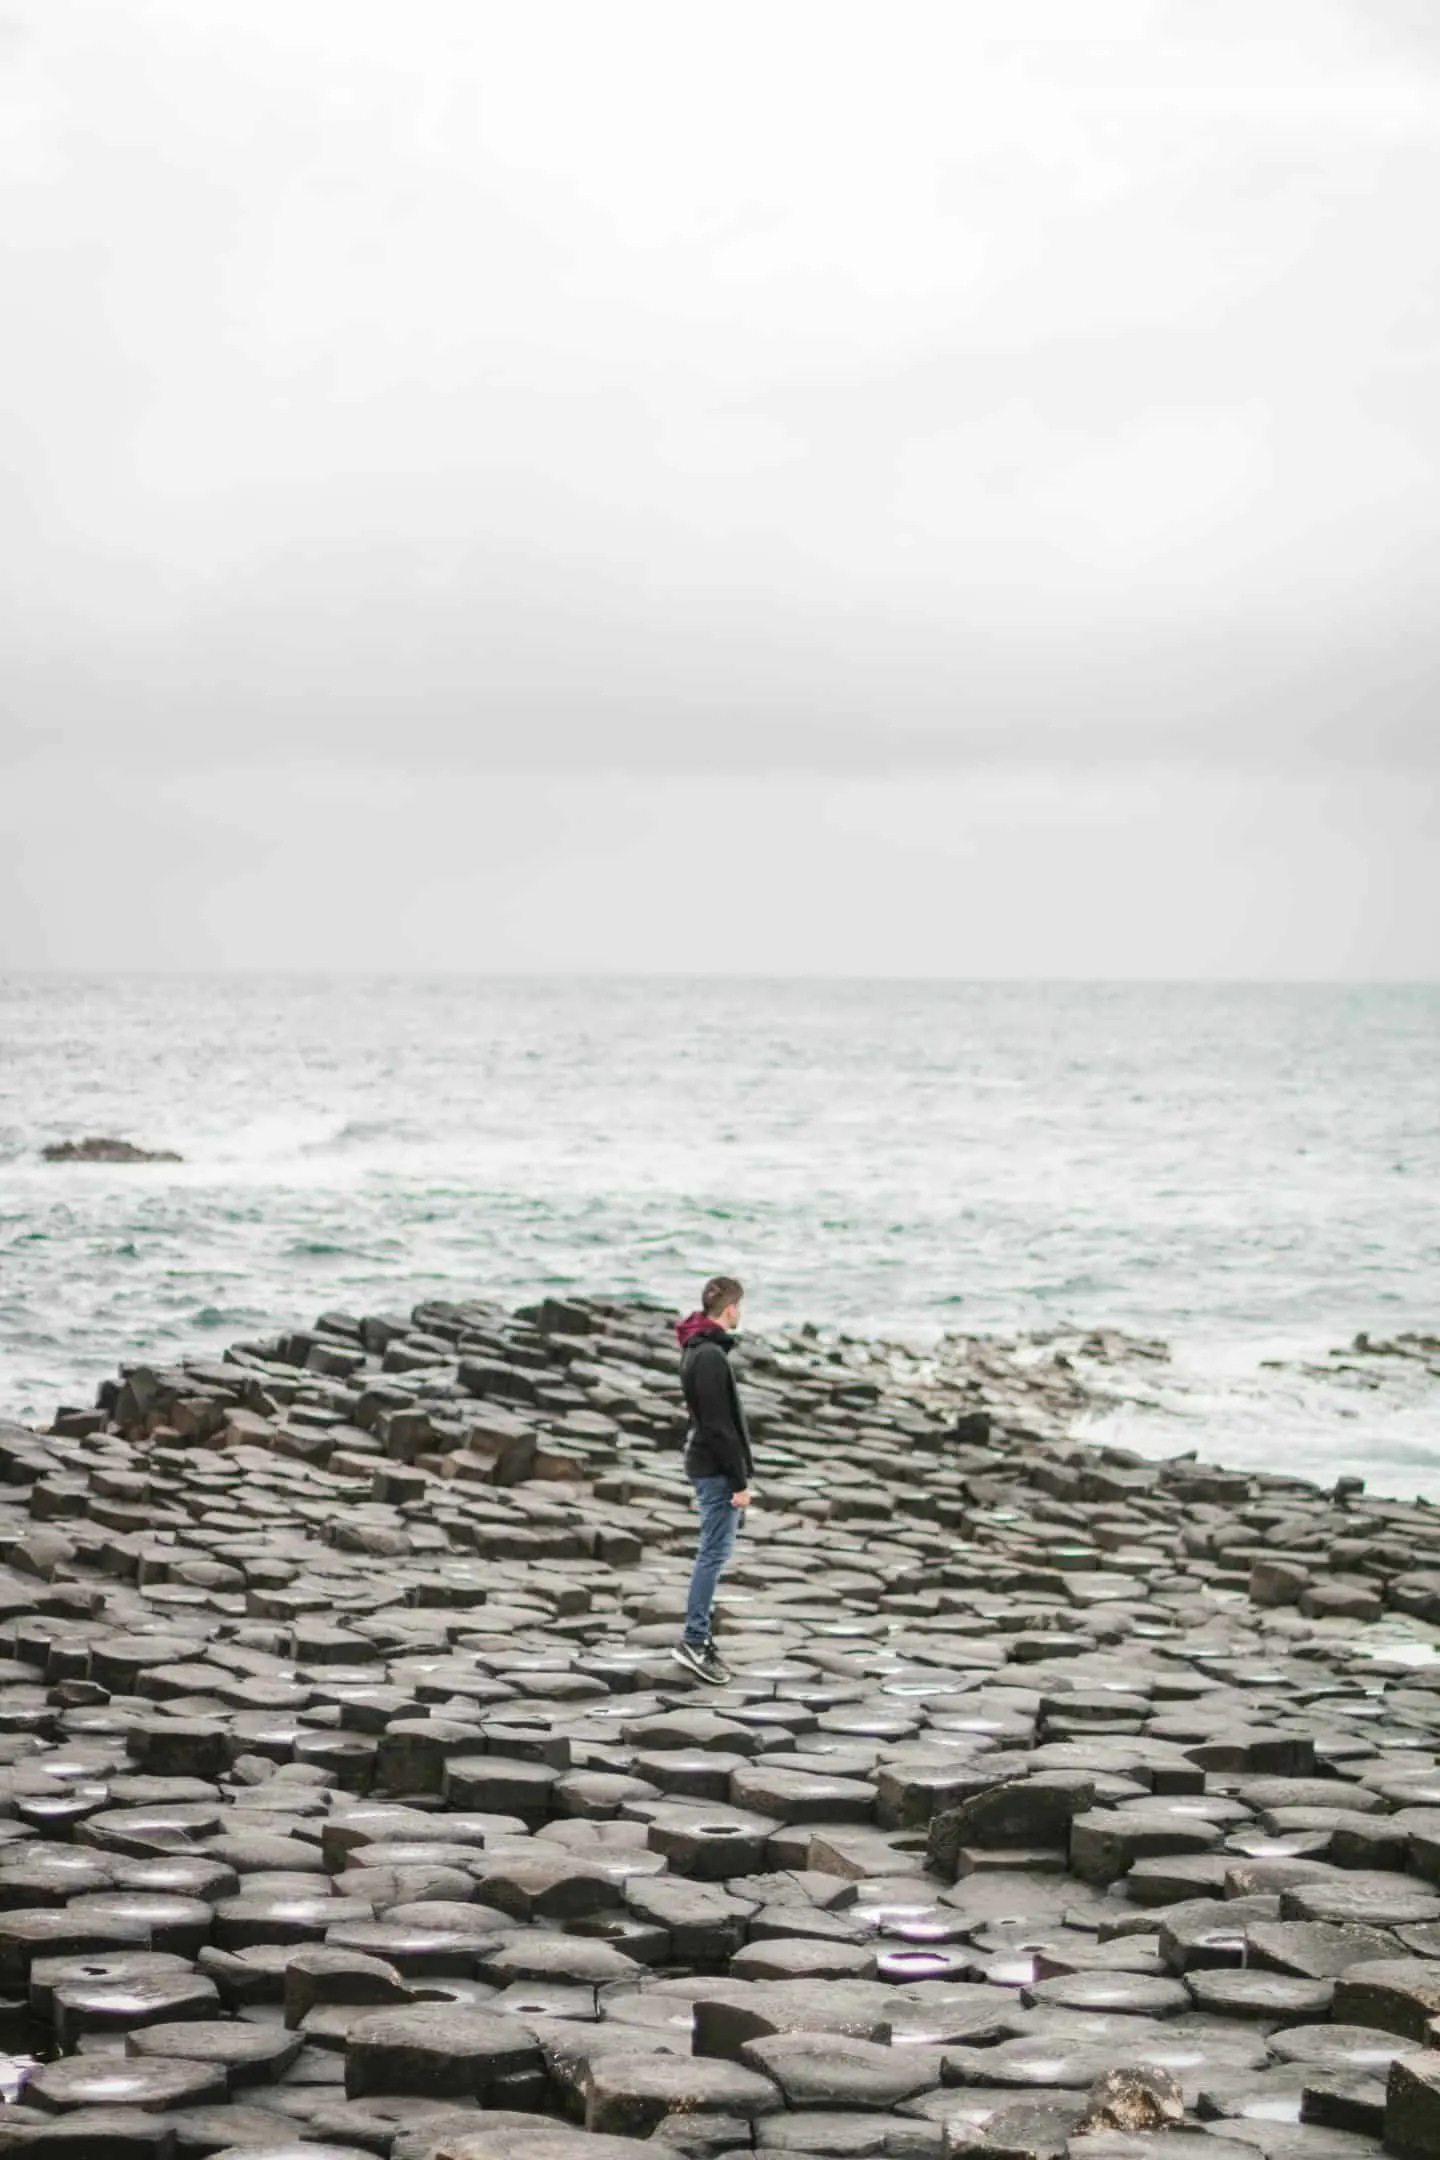 The Giant's Causeway is worth stopping along your Ireland road trip itinerary